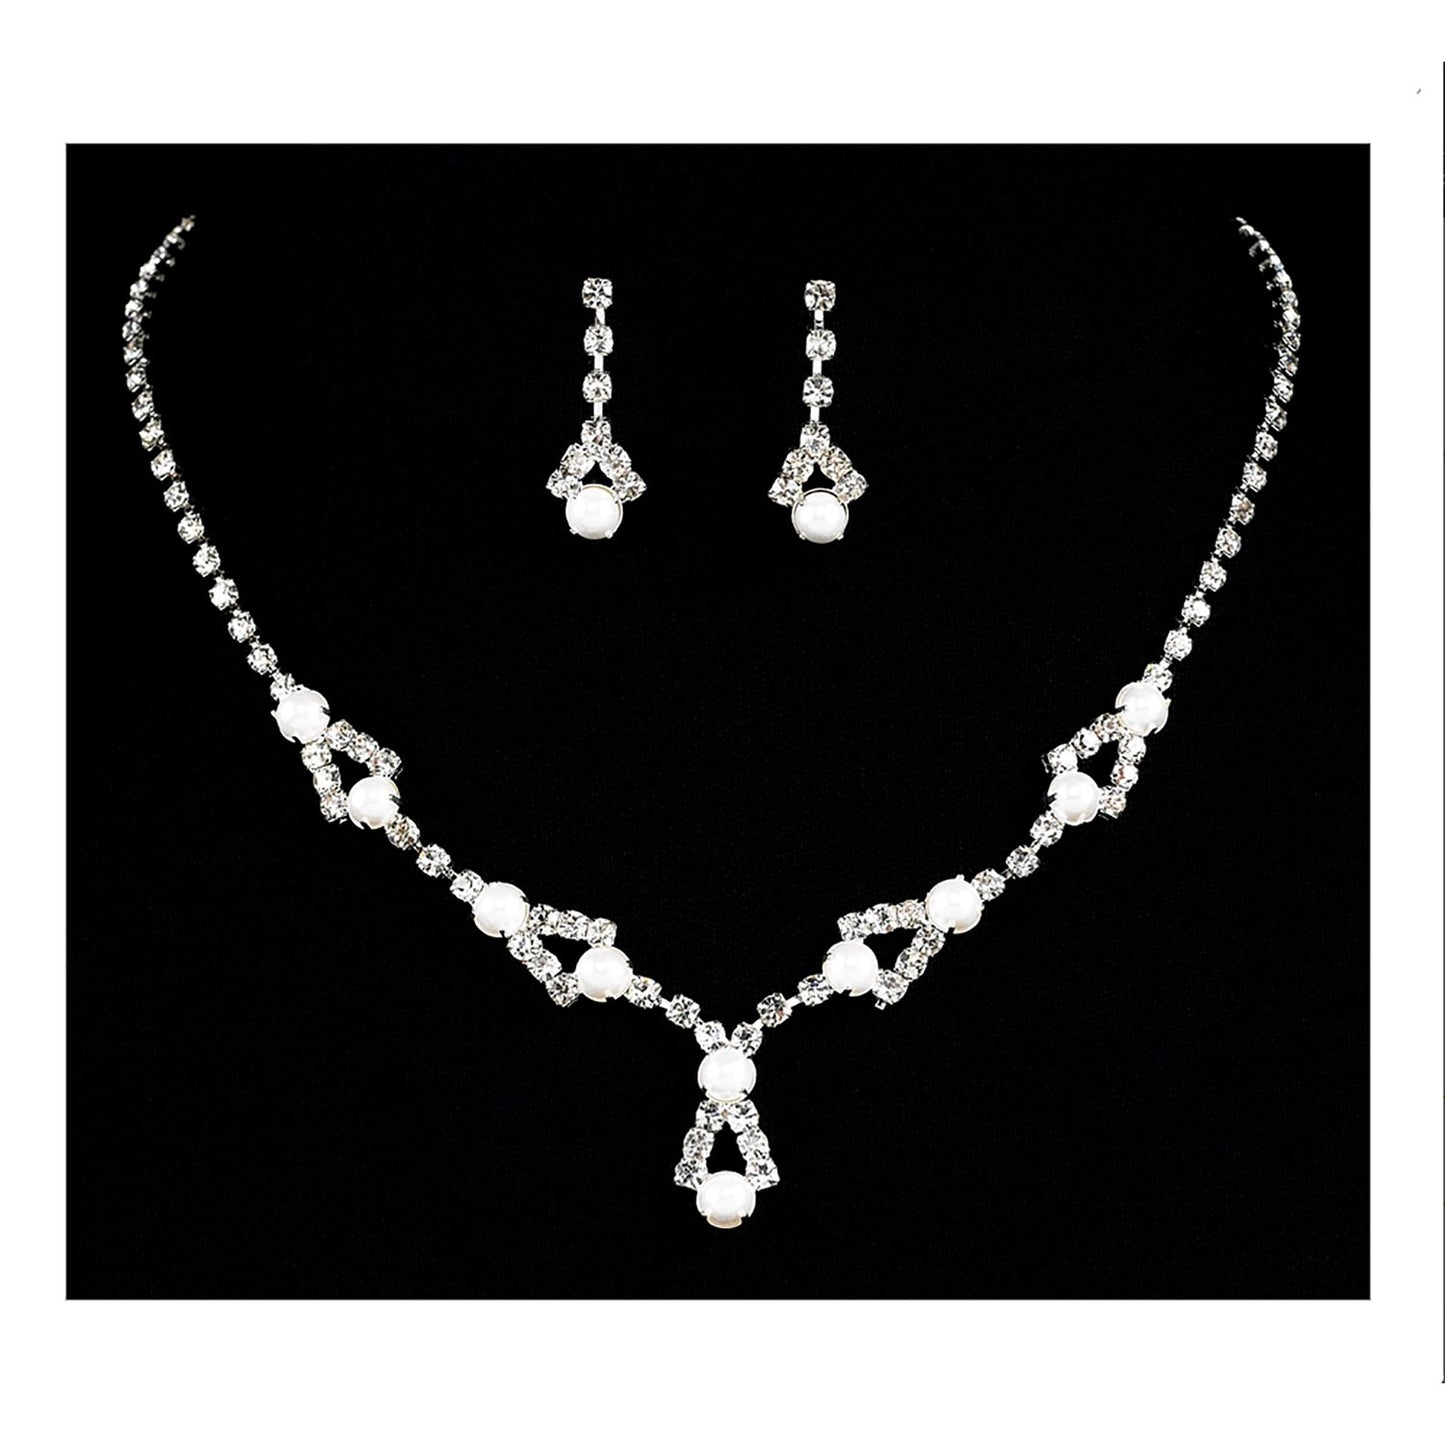 Rhinestone & Pearl Necklace with Matching Drop Earrings Set